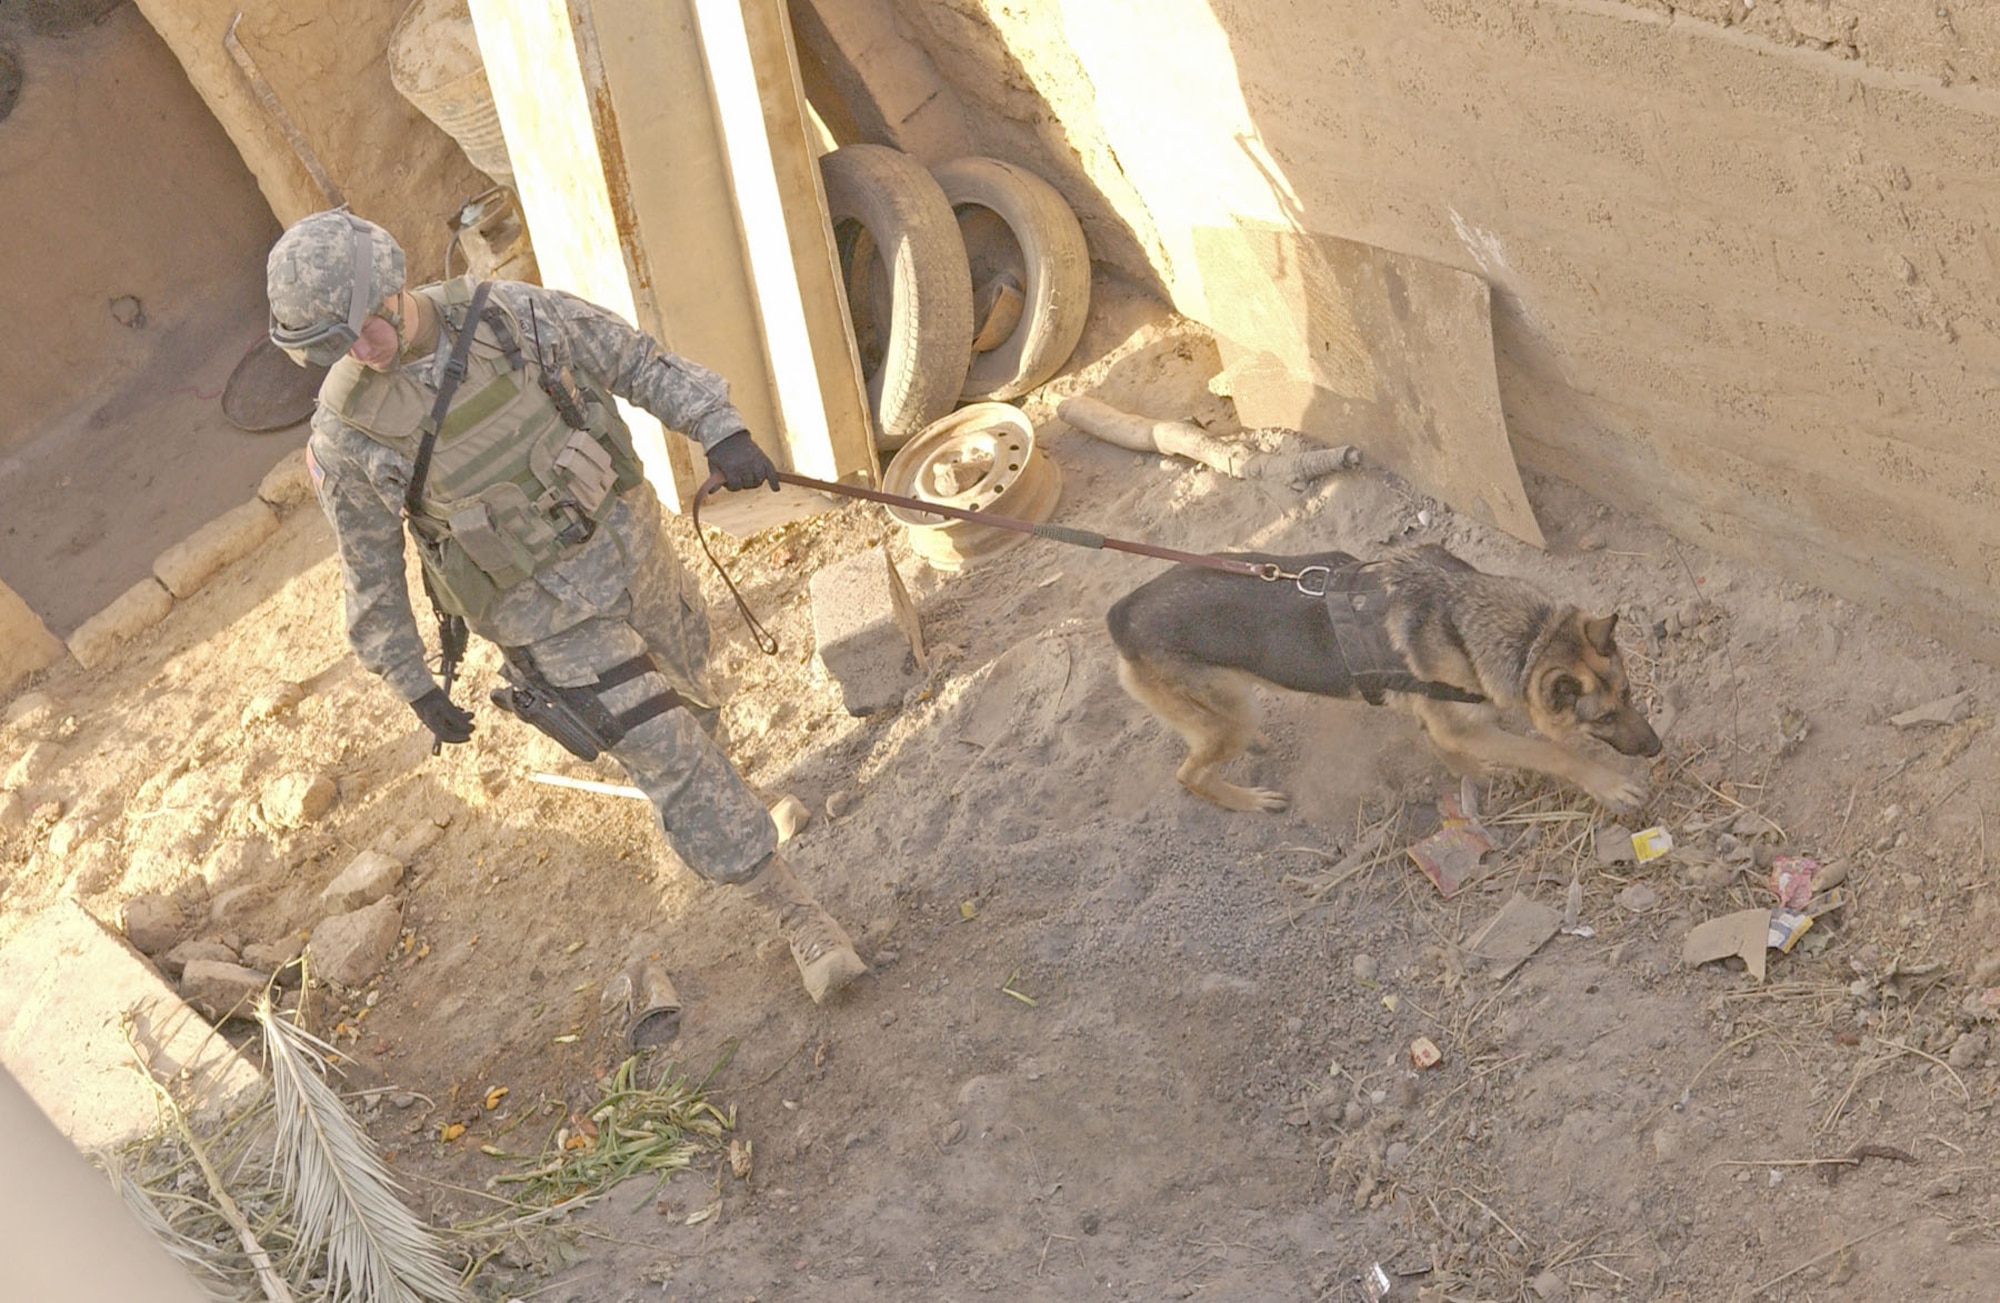 Air Force dog handler Senior Airman Daniel McClain, attached to the U.S. Army 25th Infantry Division, searches for explosive devices during a raid in Iraq in December 2006. (U.S. Air Force photo)